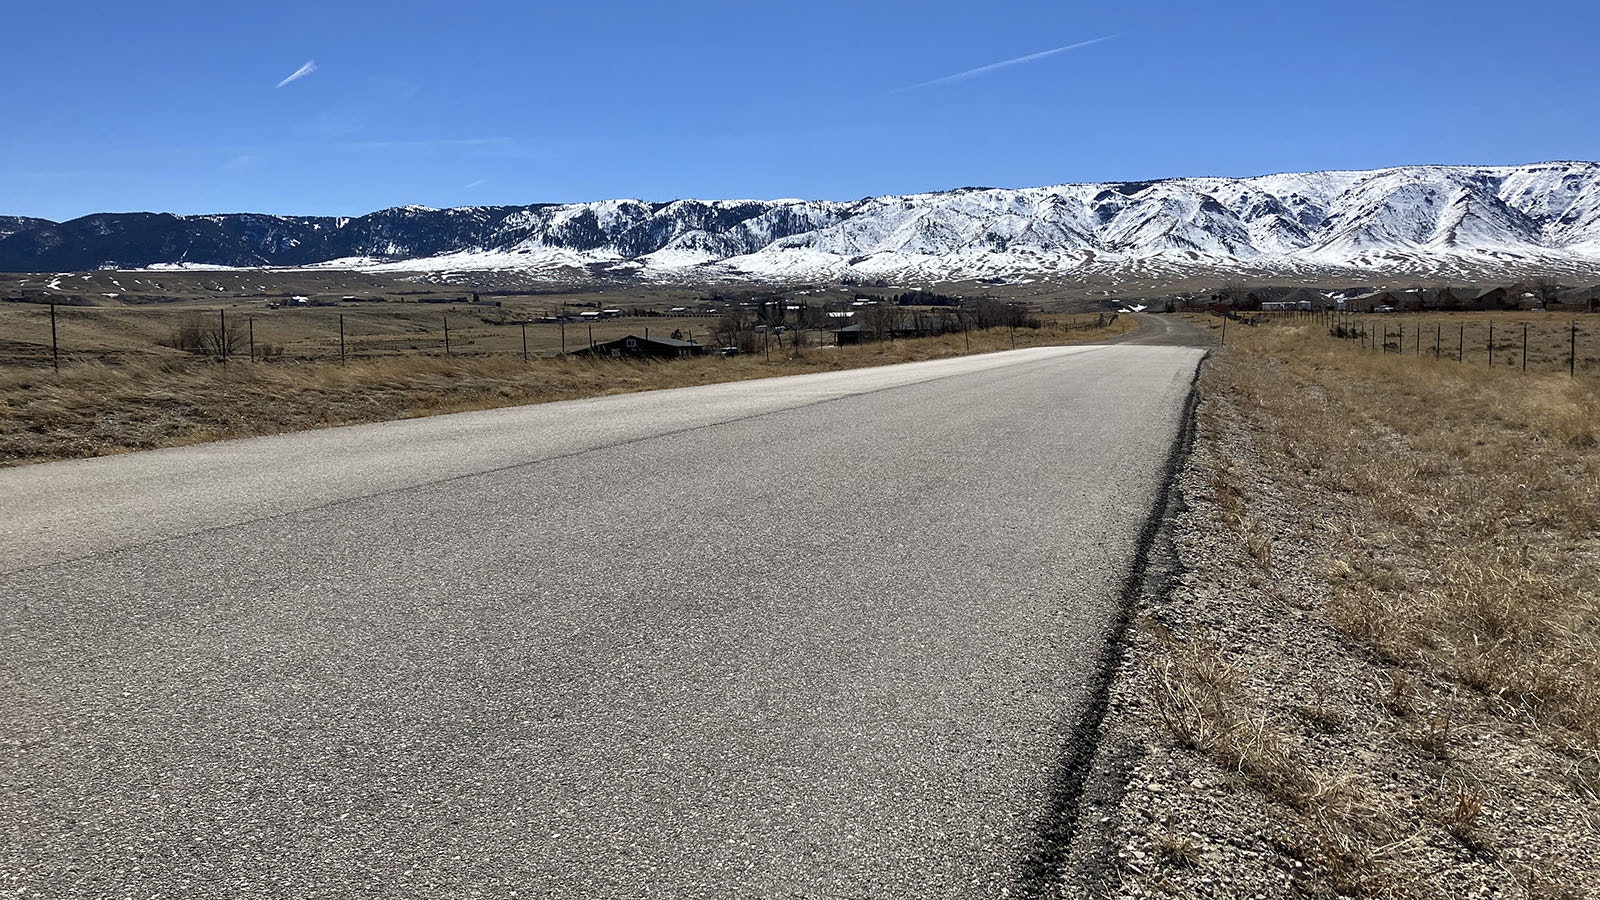 The paved portion of Coates Road, which stretches from Highway 220 back toward Casper Mountain, would be impacted by gravel operations. Casper City Manager Carter Napier said any mining operation using the road constructed with funds from the city, county, and area residents would be a concern.